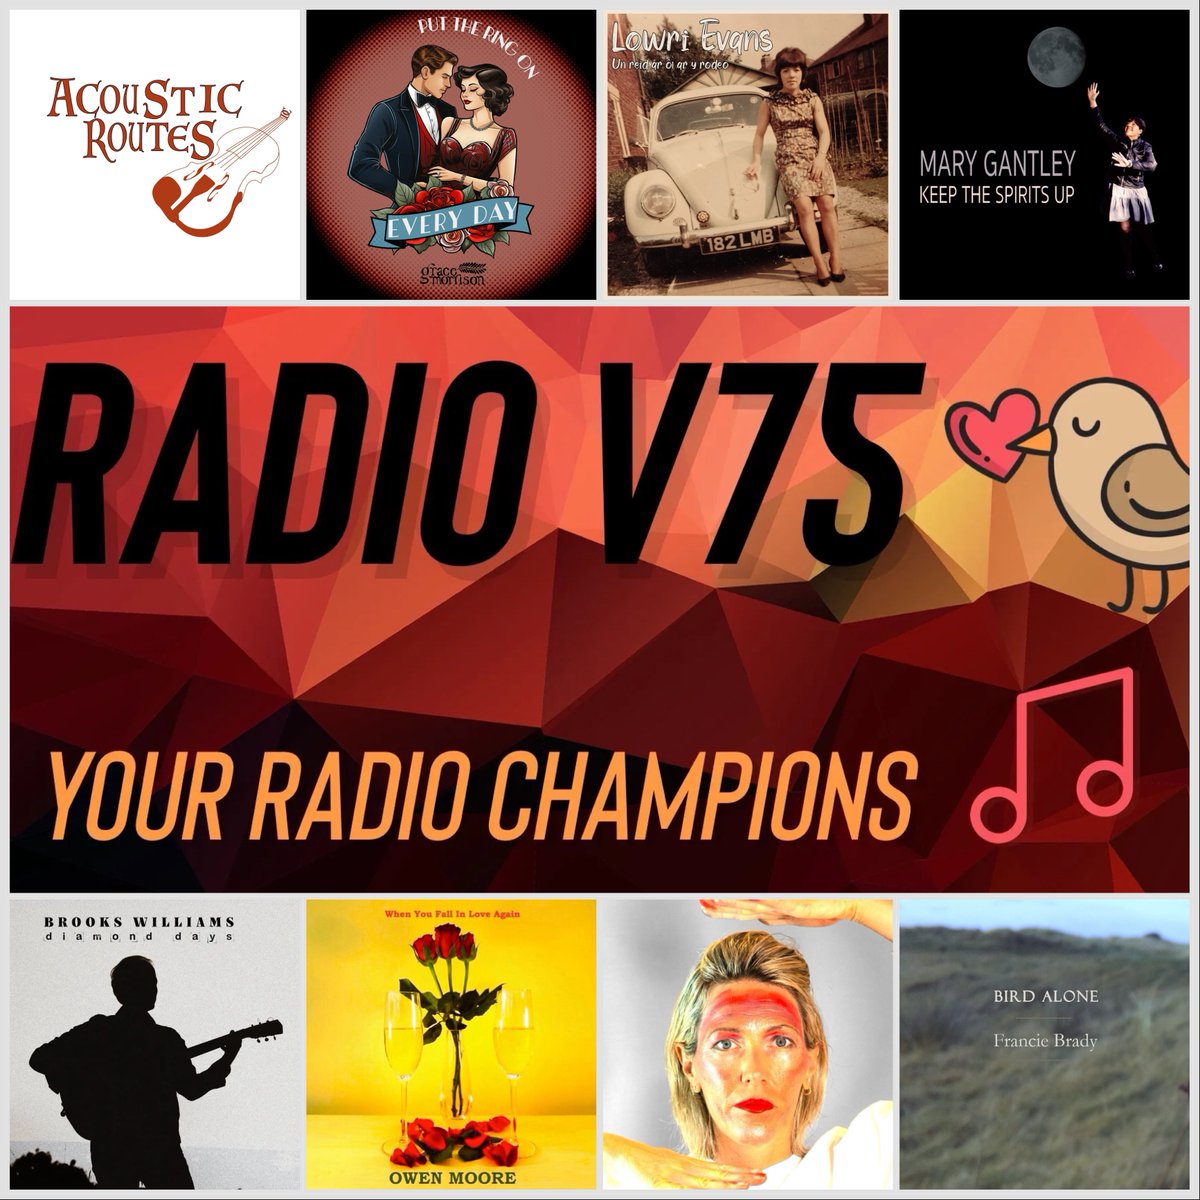 On @AcousticRoutes show 482, Featured album from @BrooksRedGuitar & tracks from @LowriEvansMusic #BirdAlone @birdmusic @littleloremusic @TangleJackBand @hevelwood @RealGraceMusic @MaryGantley3 @NoGoodBoyoBand & more. Tune in to radiov75.com 7pm 🏴󠁧󠁢󠁷󠁬󠁳󠁿🇬🇧time today